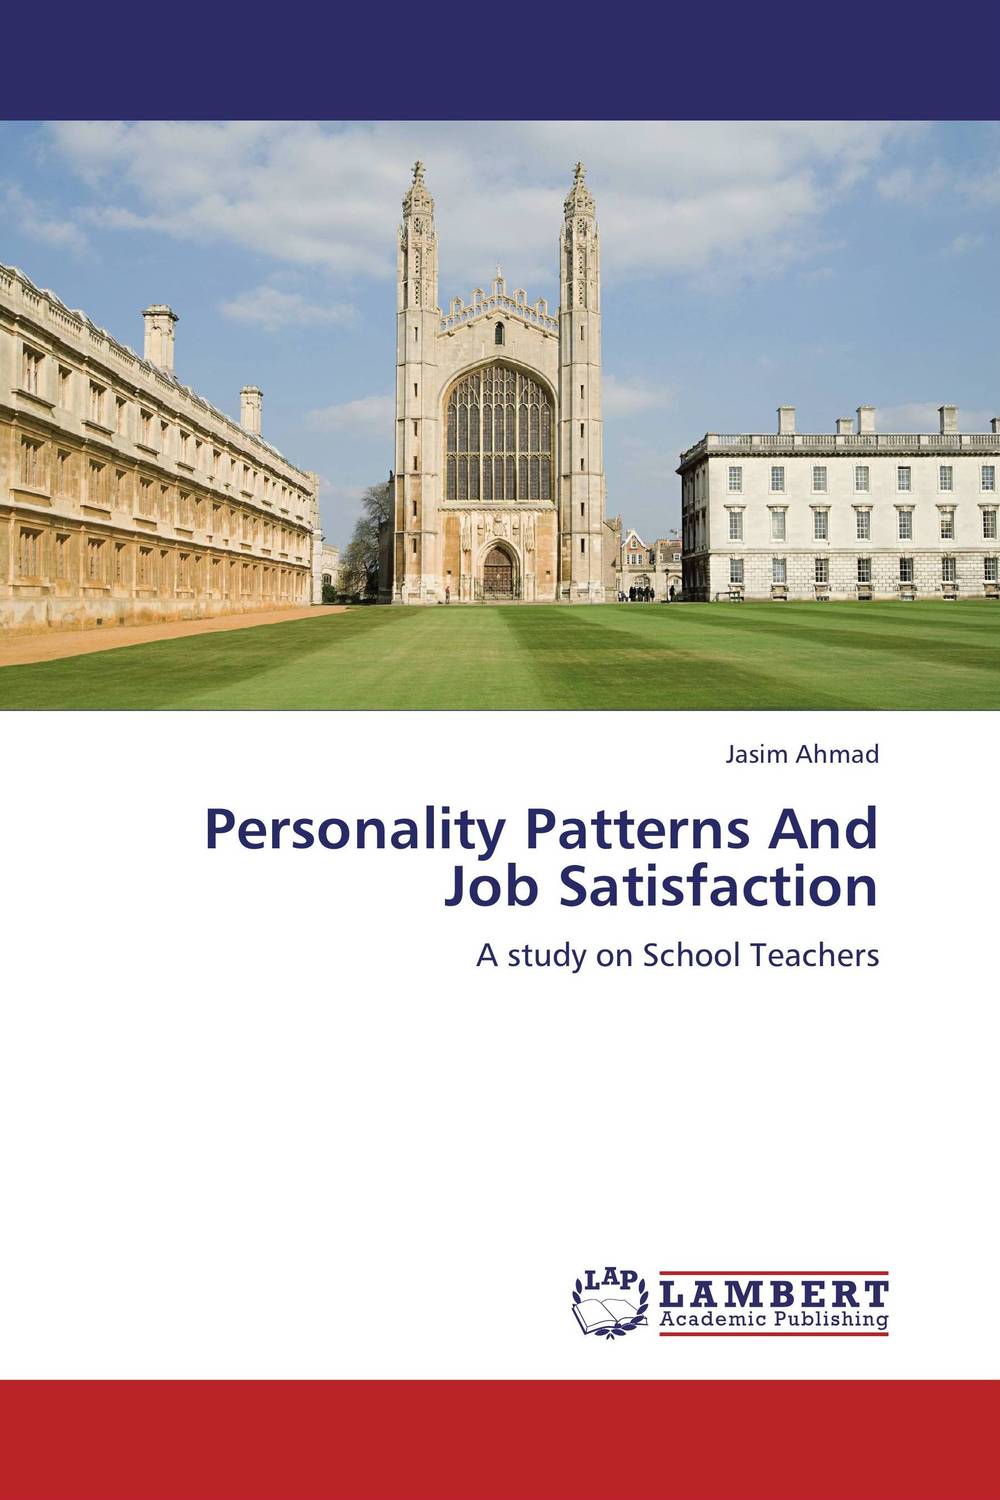 Personality Patterns And Job Satisfaction